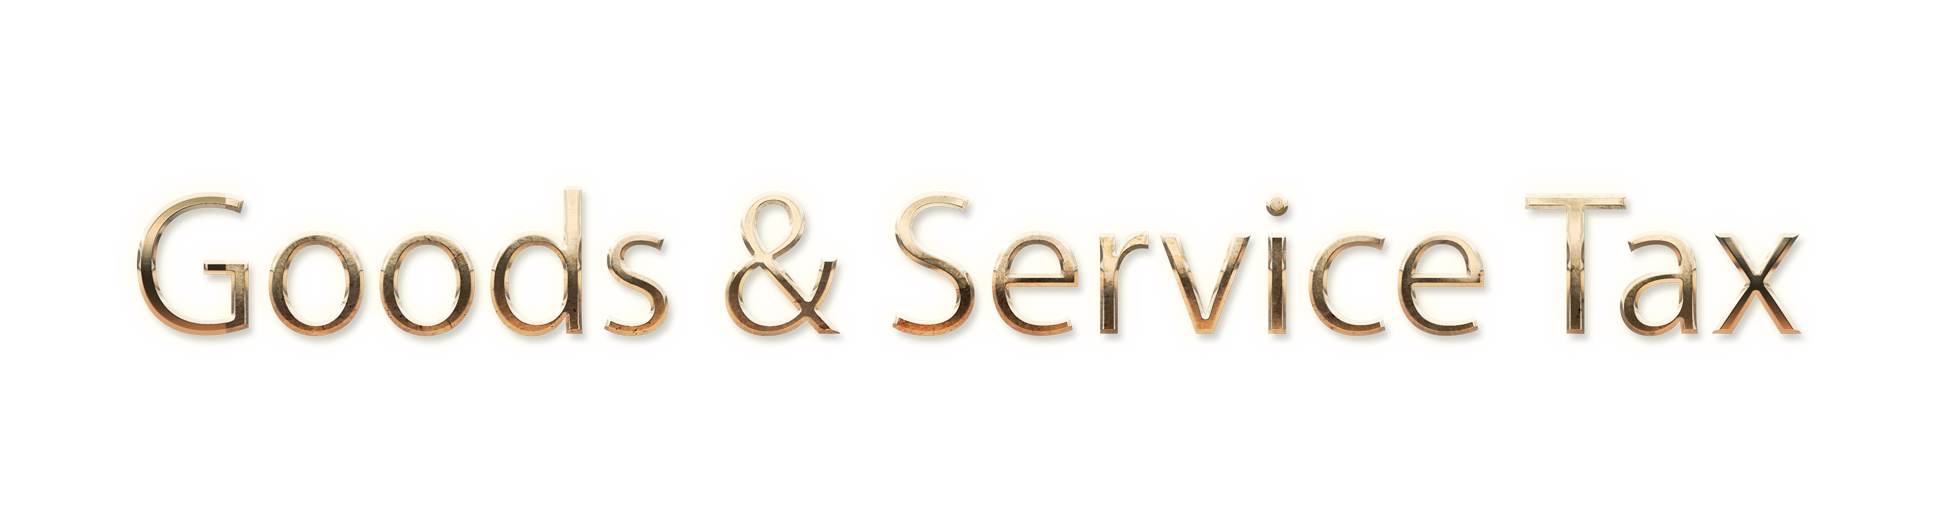 WORD GOODS AND SERVICE TAX gold text typography PNG images free